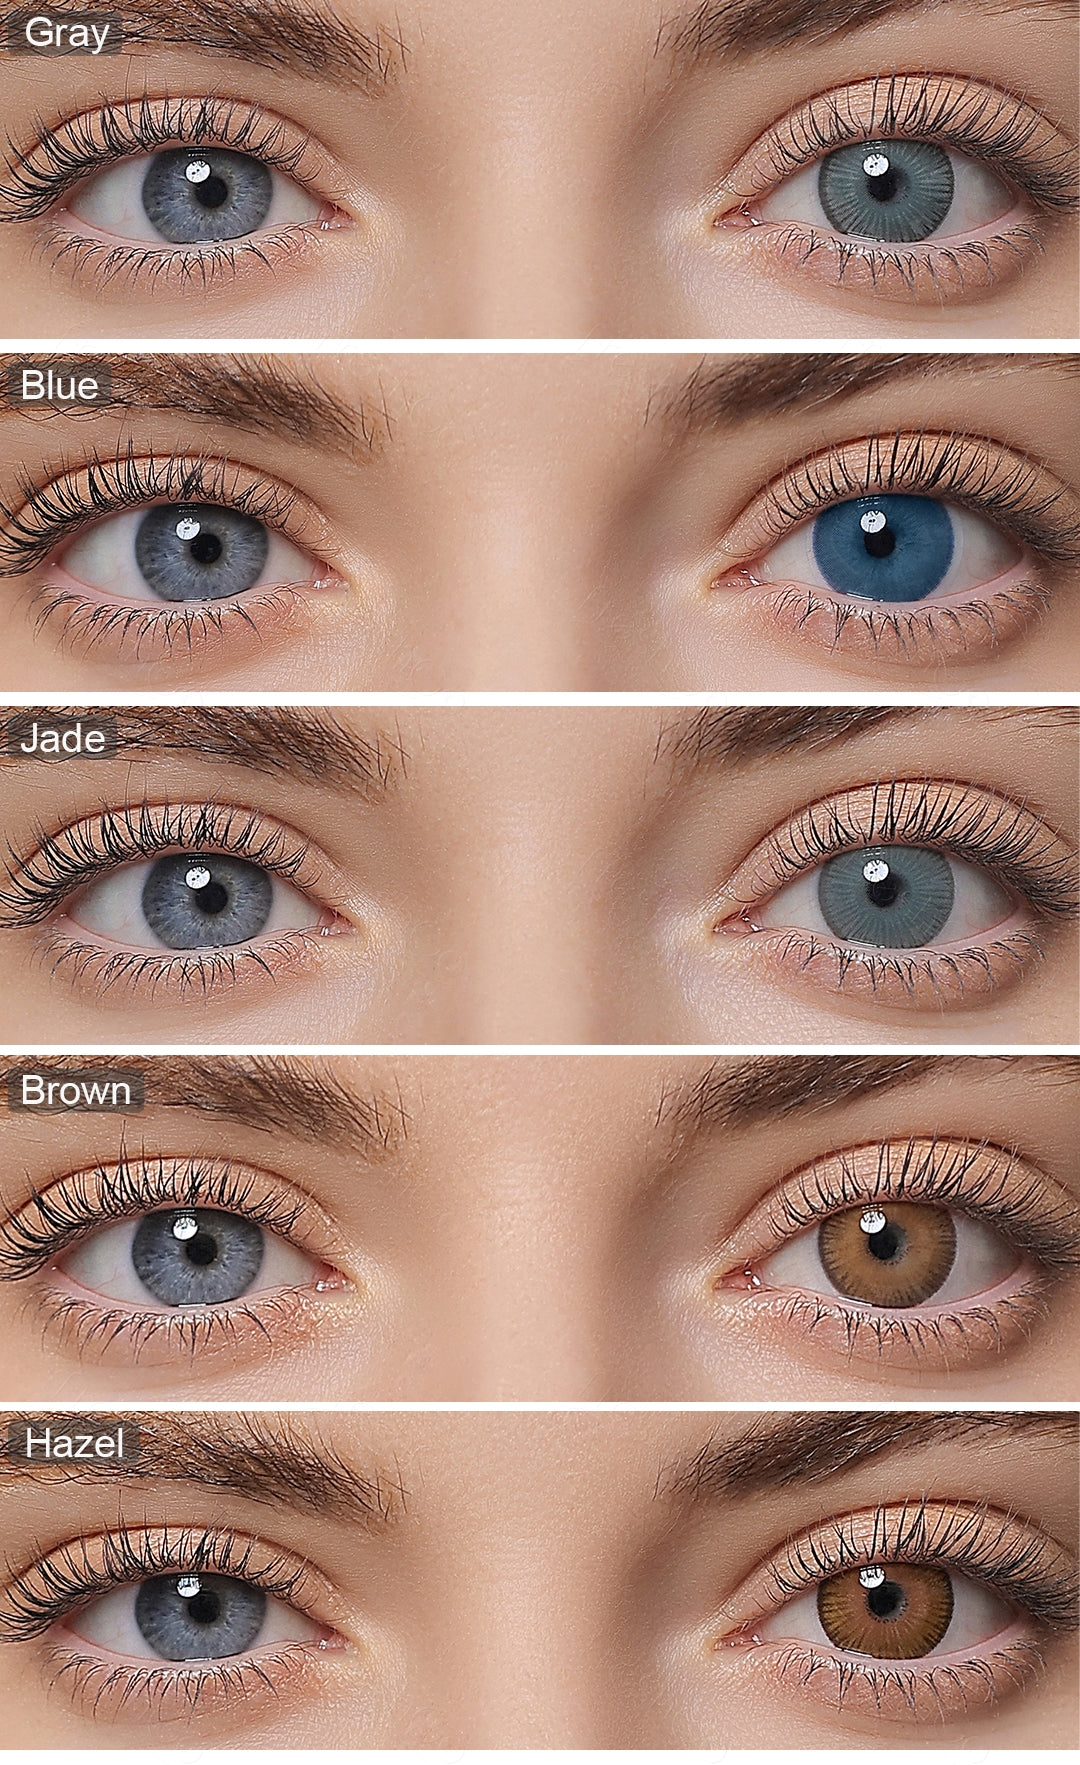 Grid display of 5 shades of Fiesta colored contacts, showing a variety of shades including Gray, Blue, Jade, Brown, Hazel, each paired with a close-up before and after comparison view of the lens pattern and the effecton a dark-eyed model.